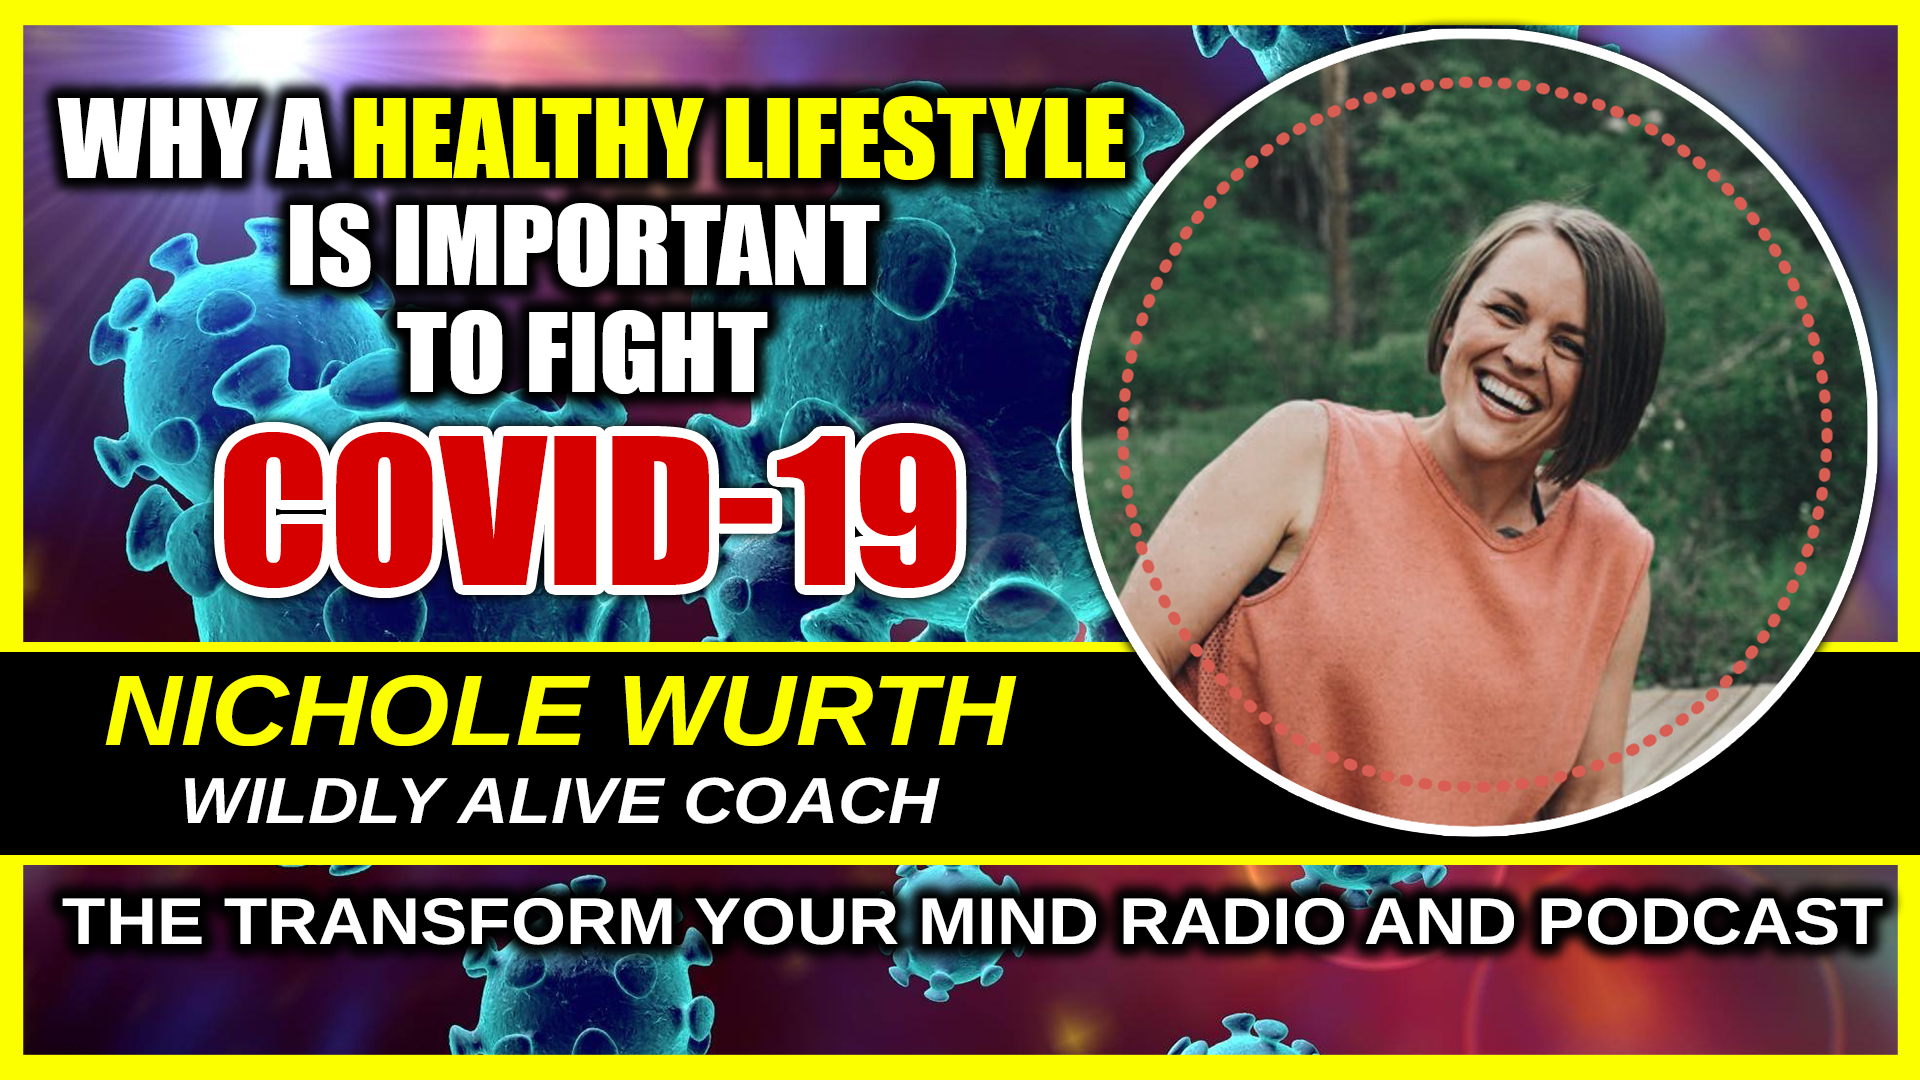 Have a Healthy Lifestyle During covid-19